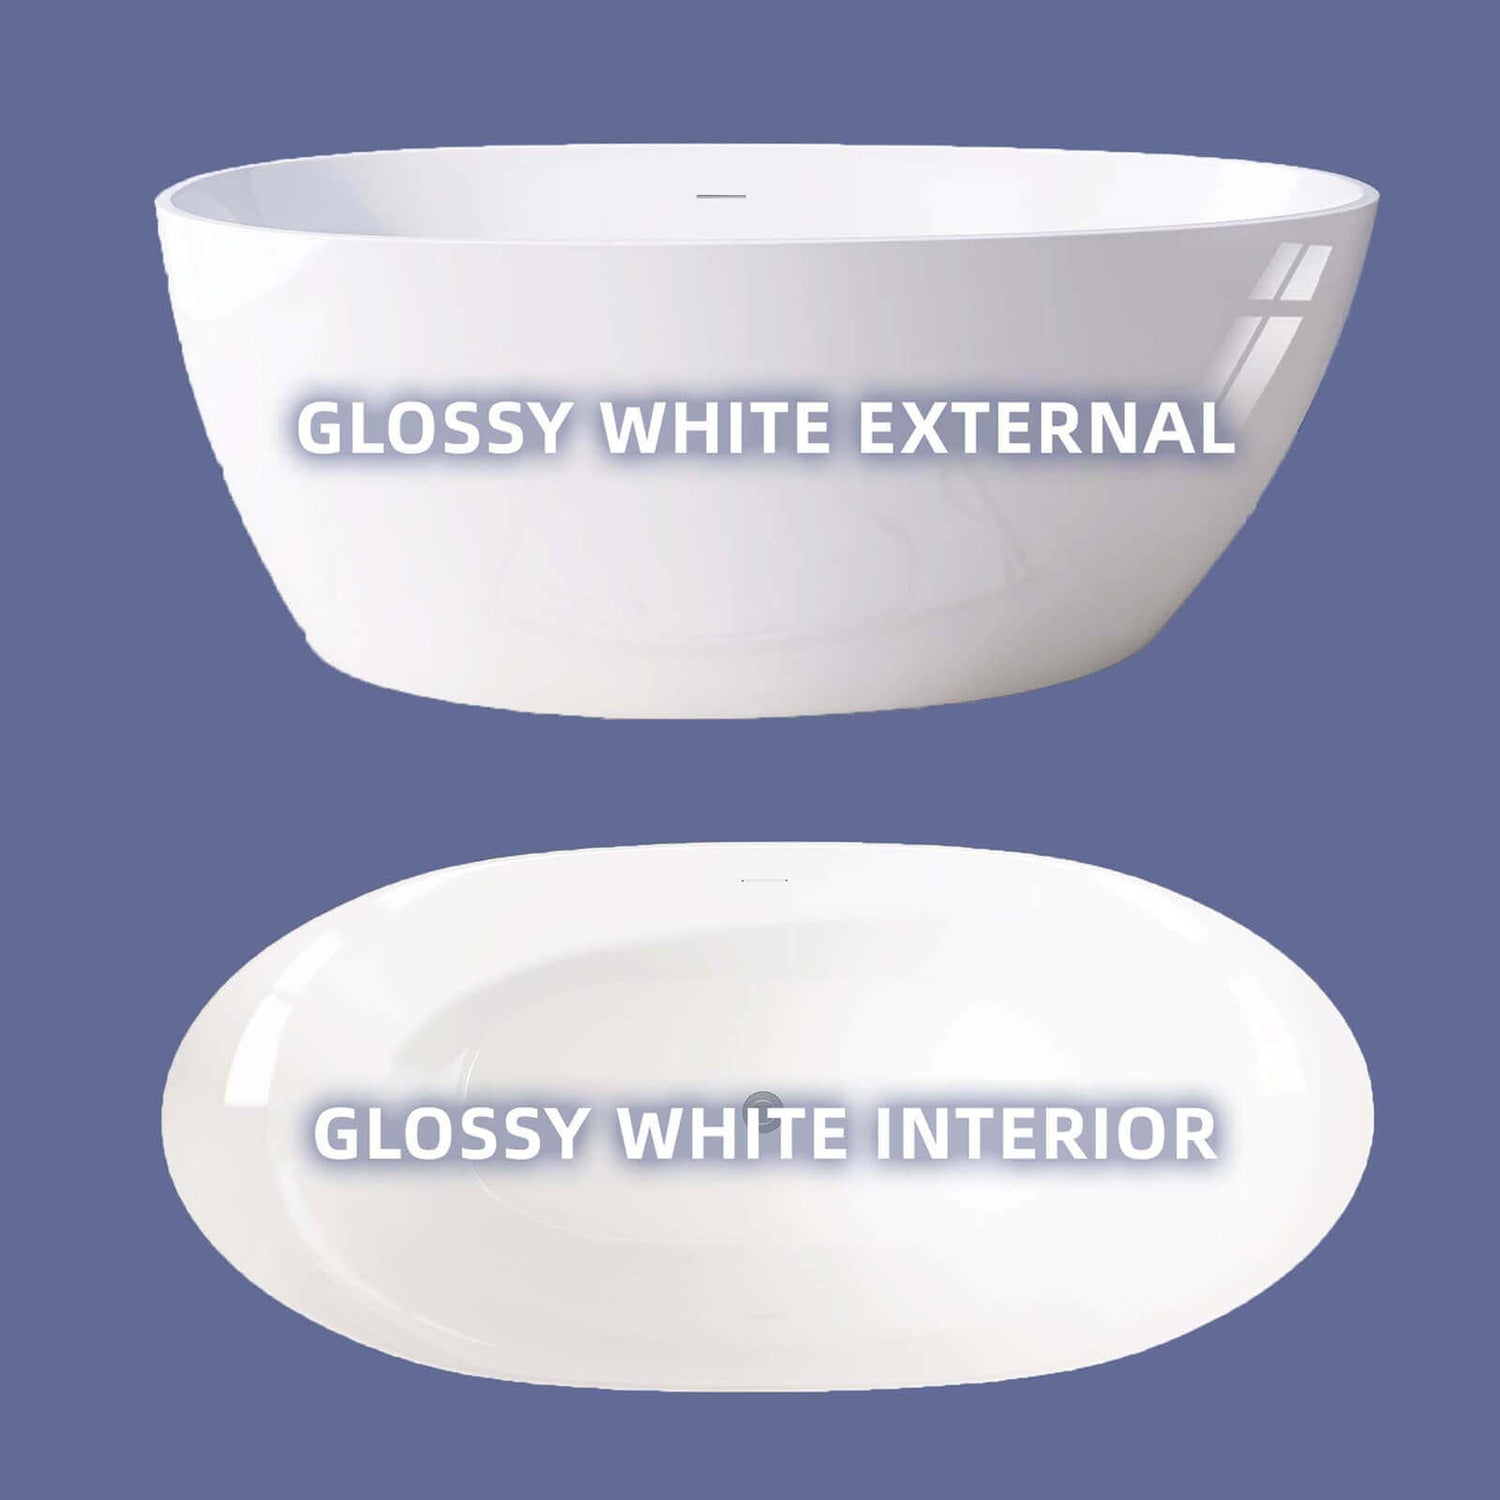 55 inch glossy white acrylic free standing bathtub color difference comparison between the inner and outer tubs